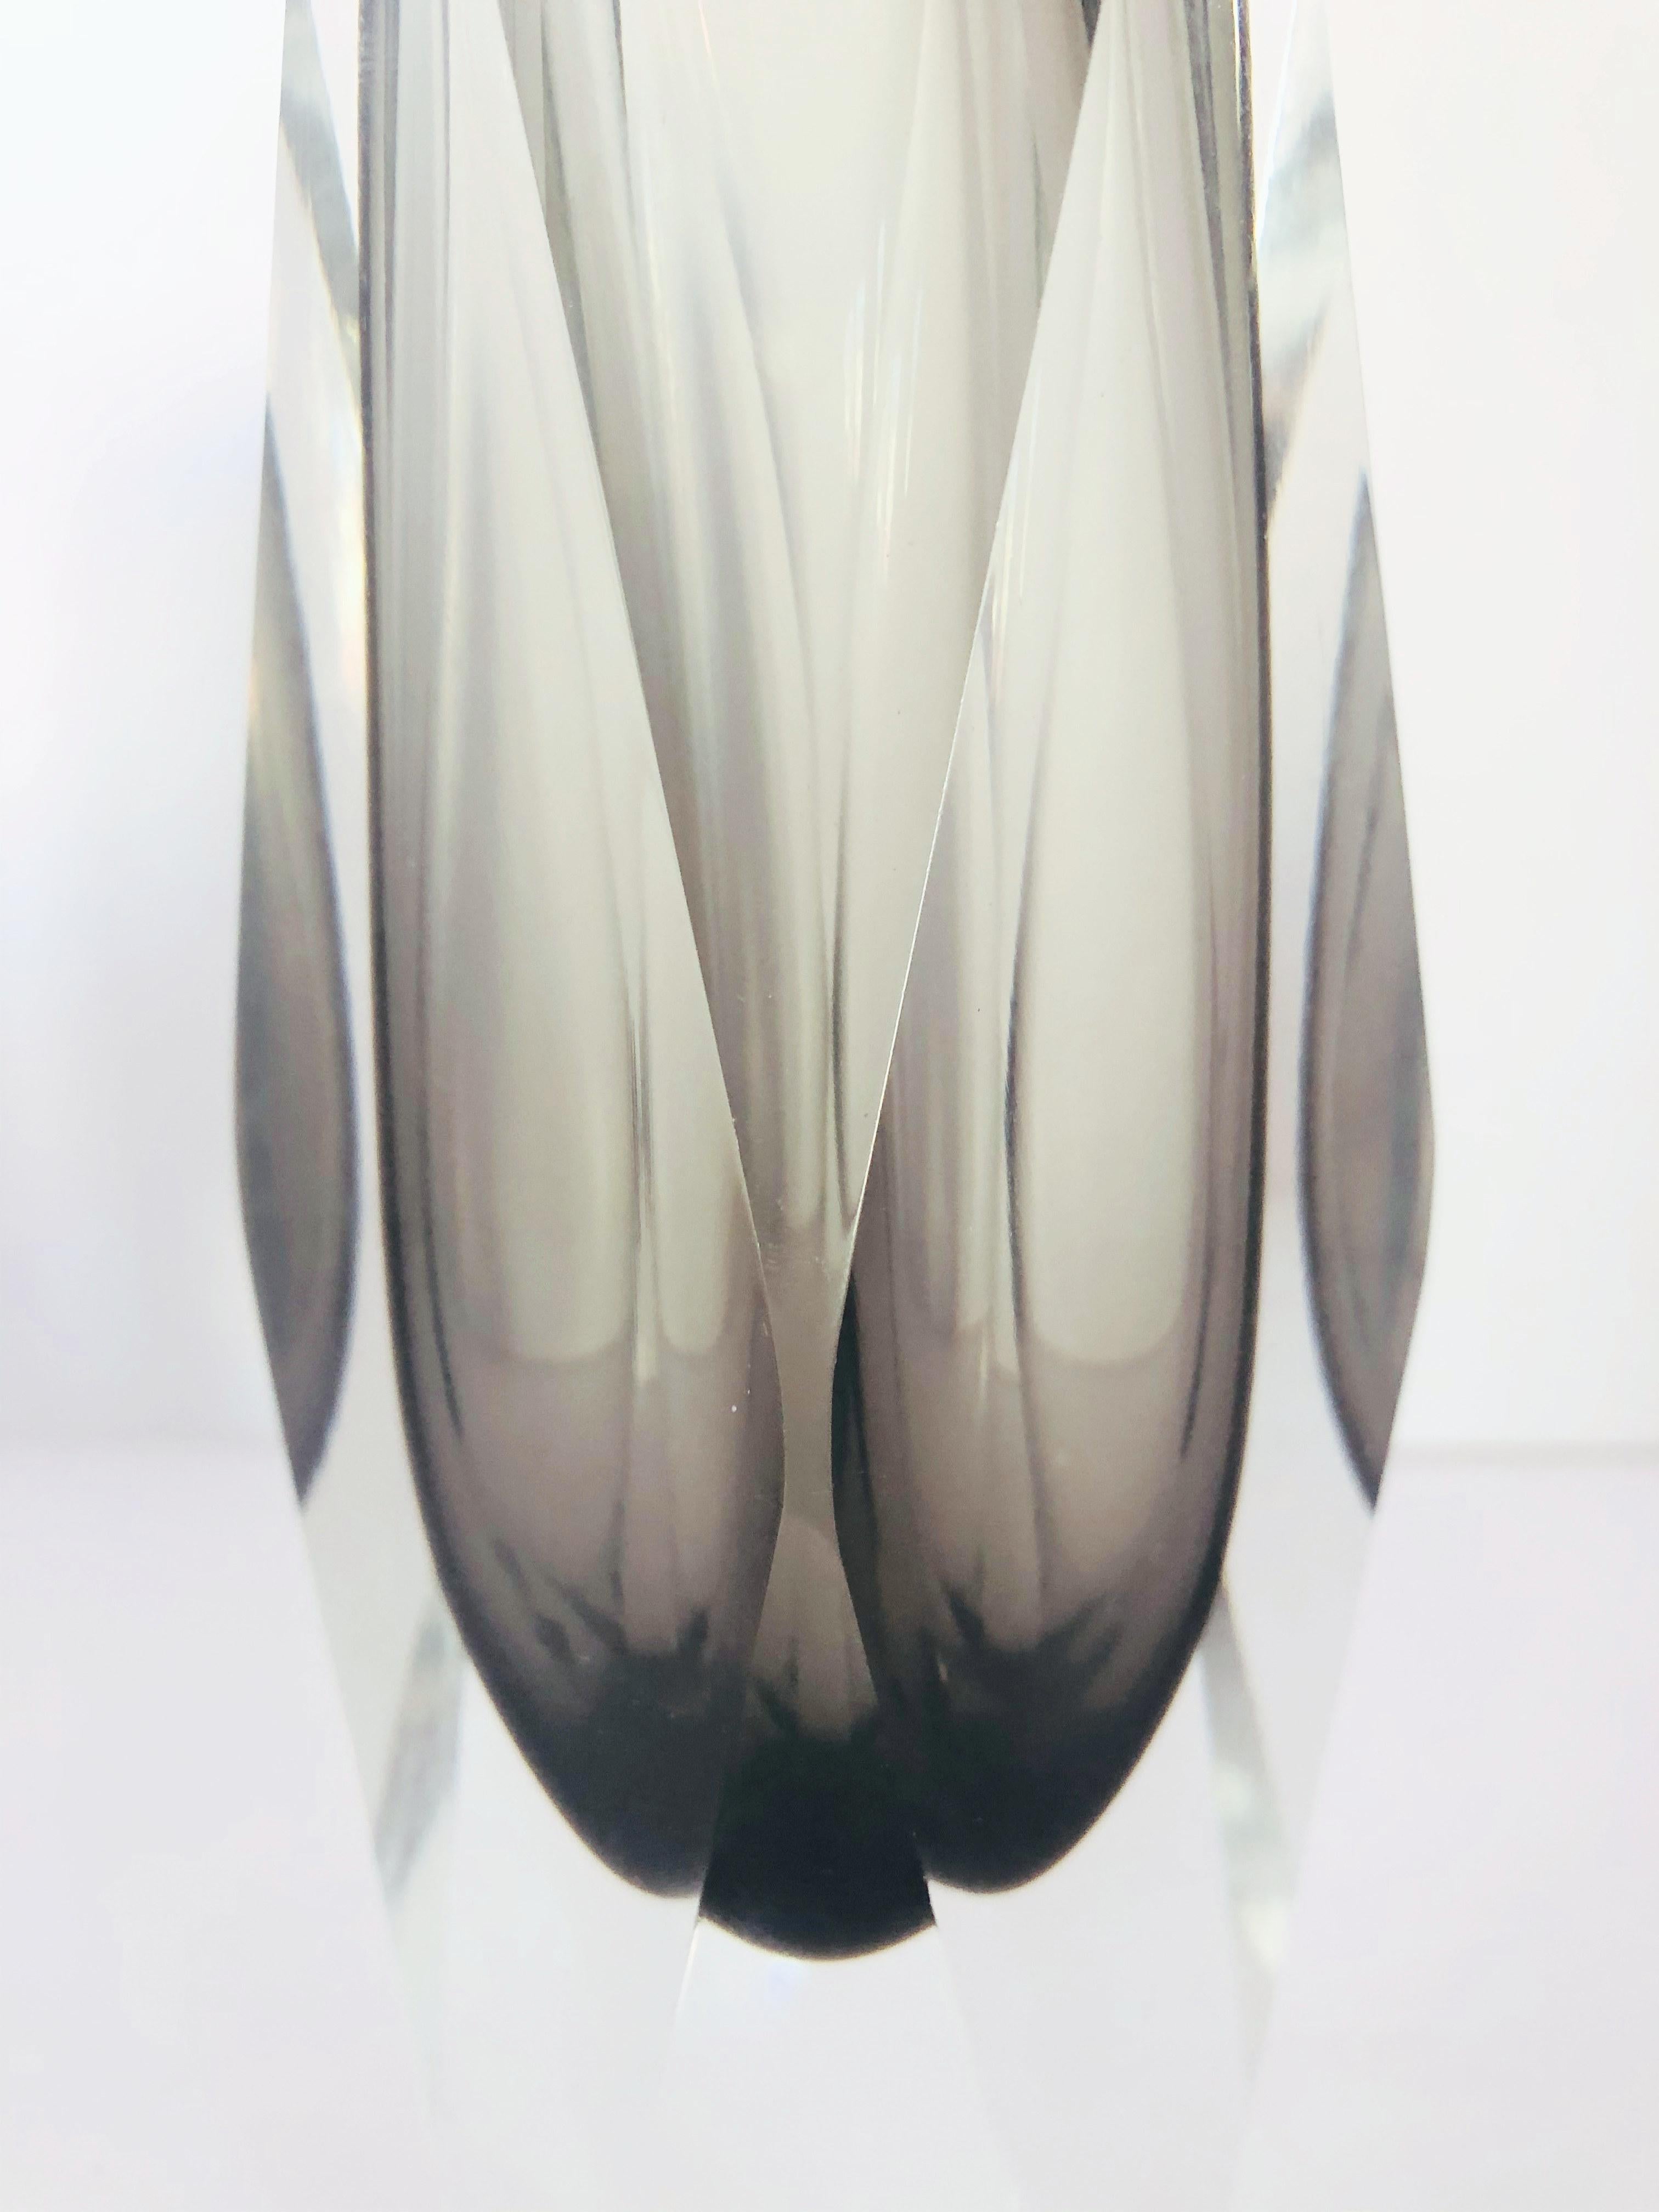 Smoky Faceted Sommerso Vase by Mandruzzato FINAL CLEARANCE SALE In Good Condition In Los Angeles, CA